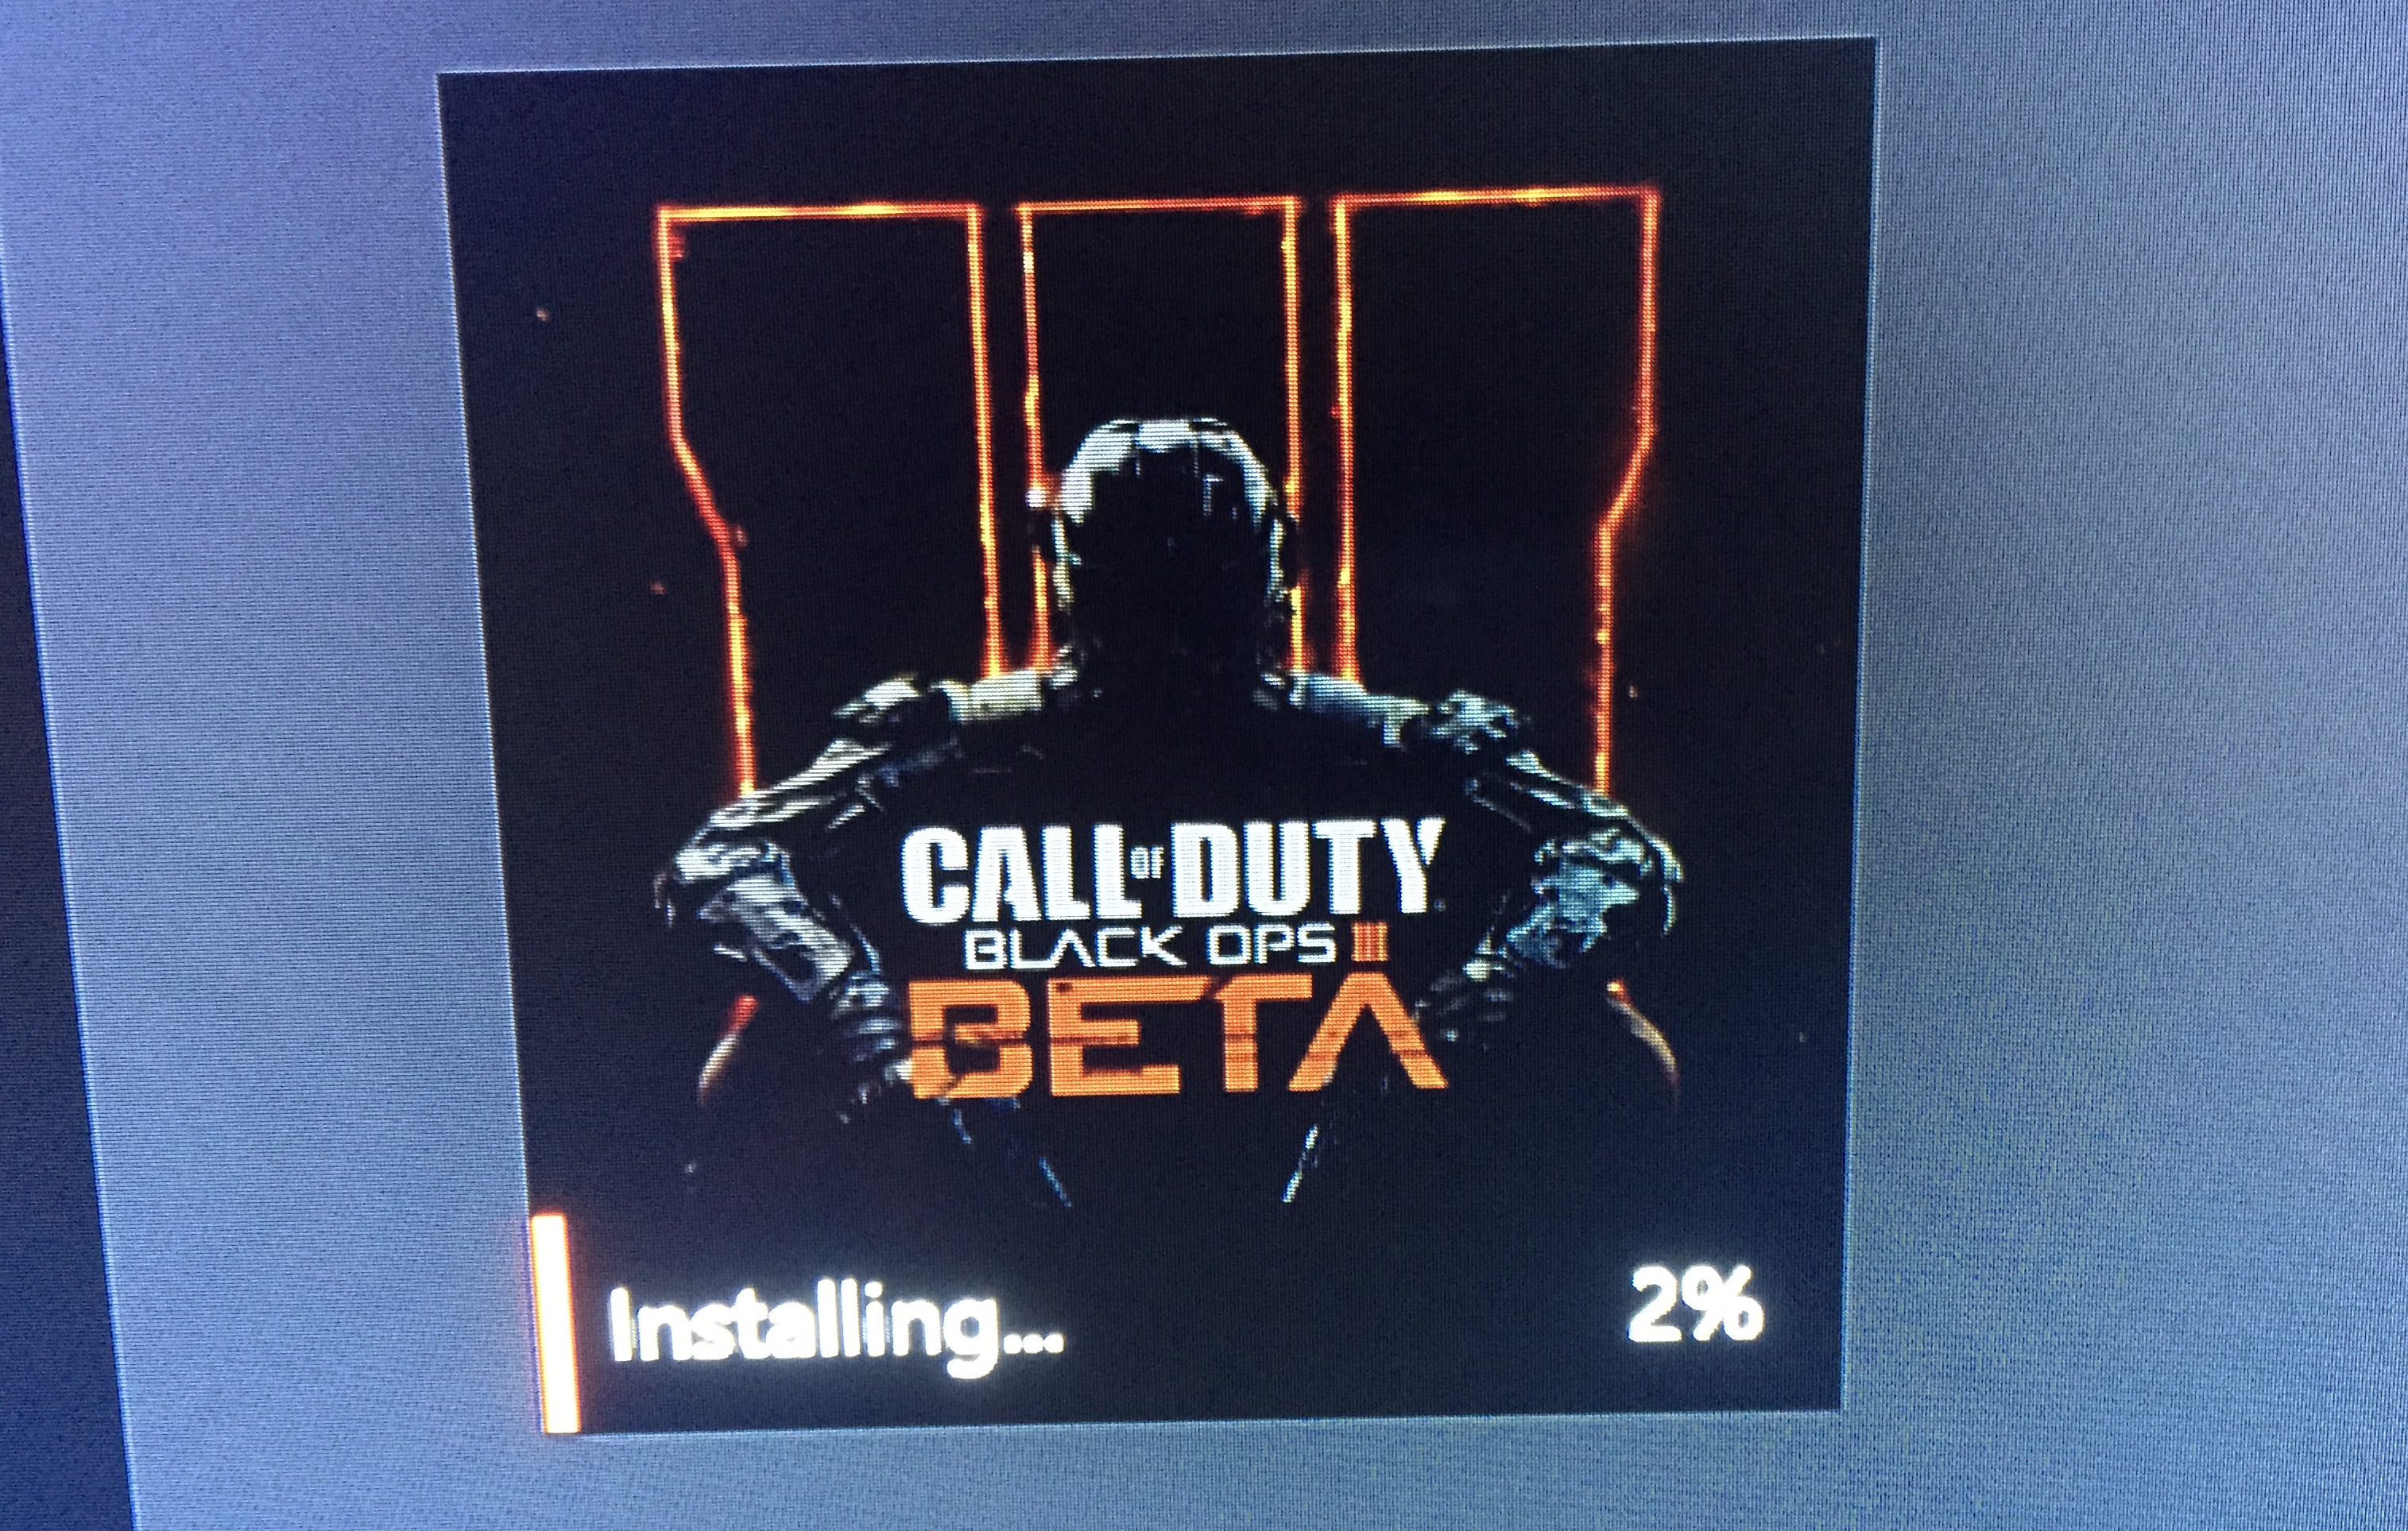 Everyone with a Xbox One can download the Call of Duty: Black Ops 3 beta.